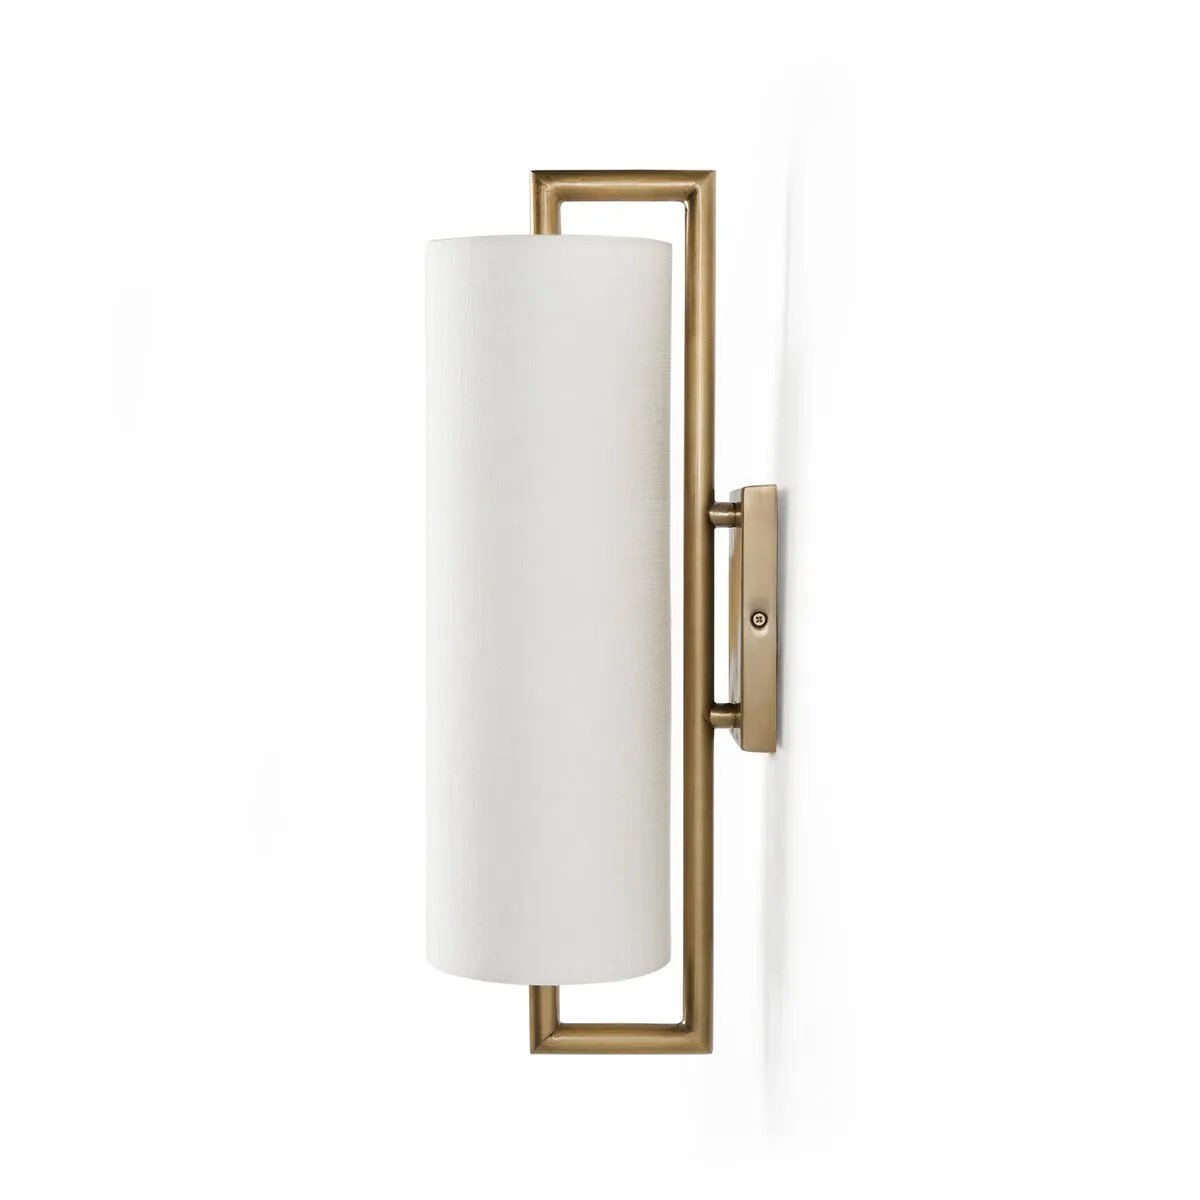 Featuring a single, elongated linen shade, this sconce gracefully diffuses light and is mounted on a streamlined aged brass frame for a sleek, contemporary look.Collection: Camde Amethyst Home provides interior design, new home construction design consulting, vintage area rugs, and lighting in the Newport Beach metro area.